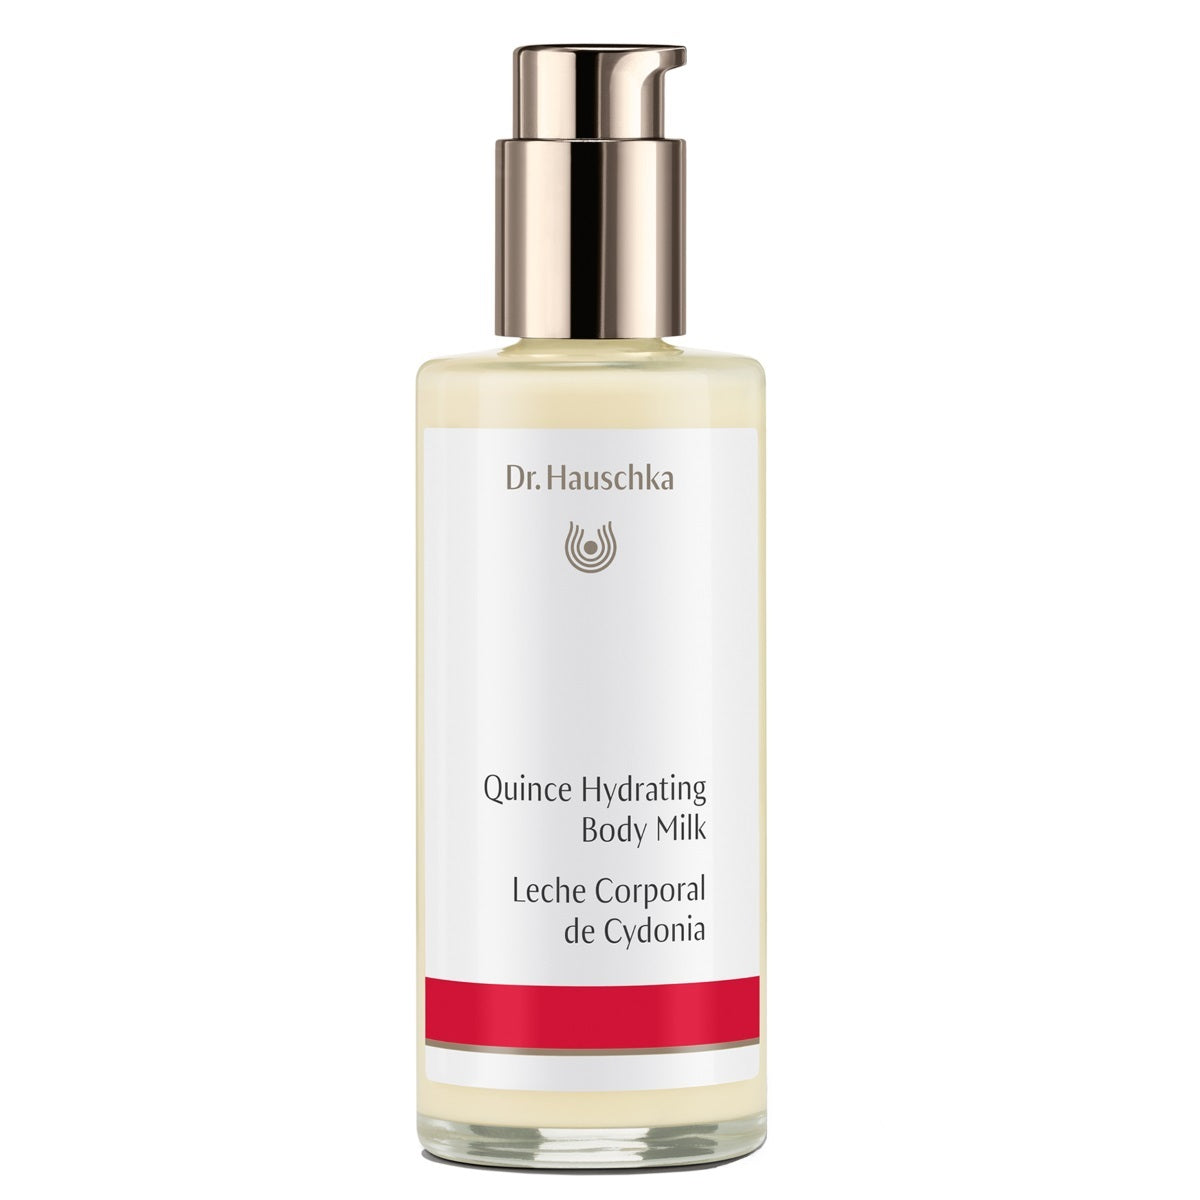 Primary image of Quince Hydrating Body Milk